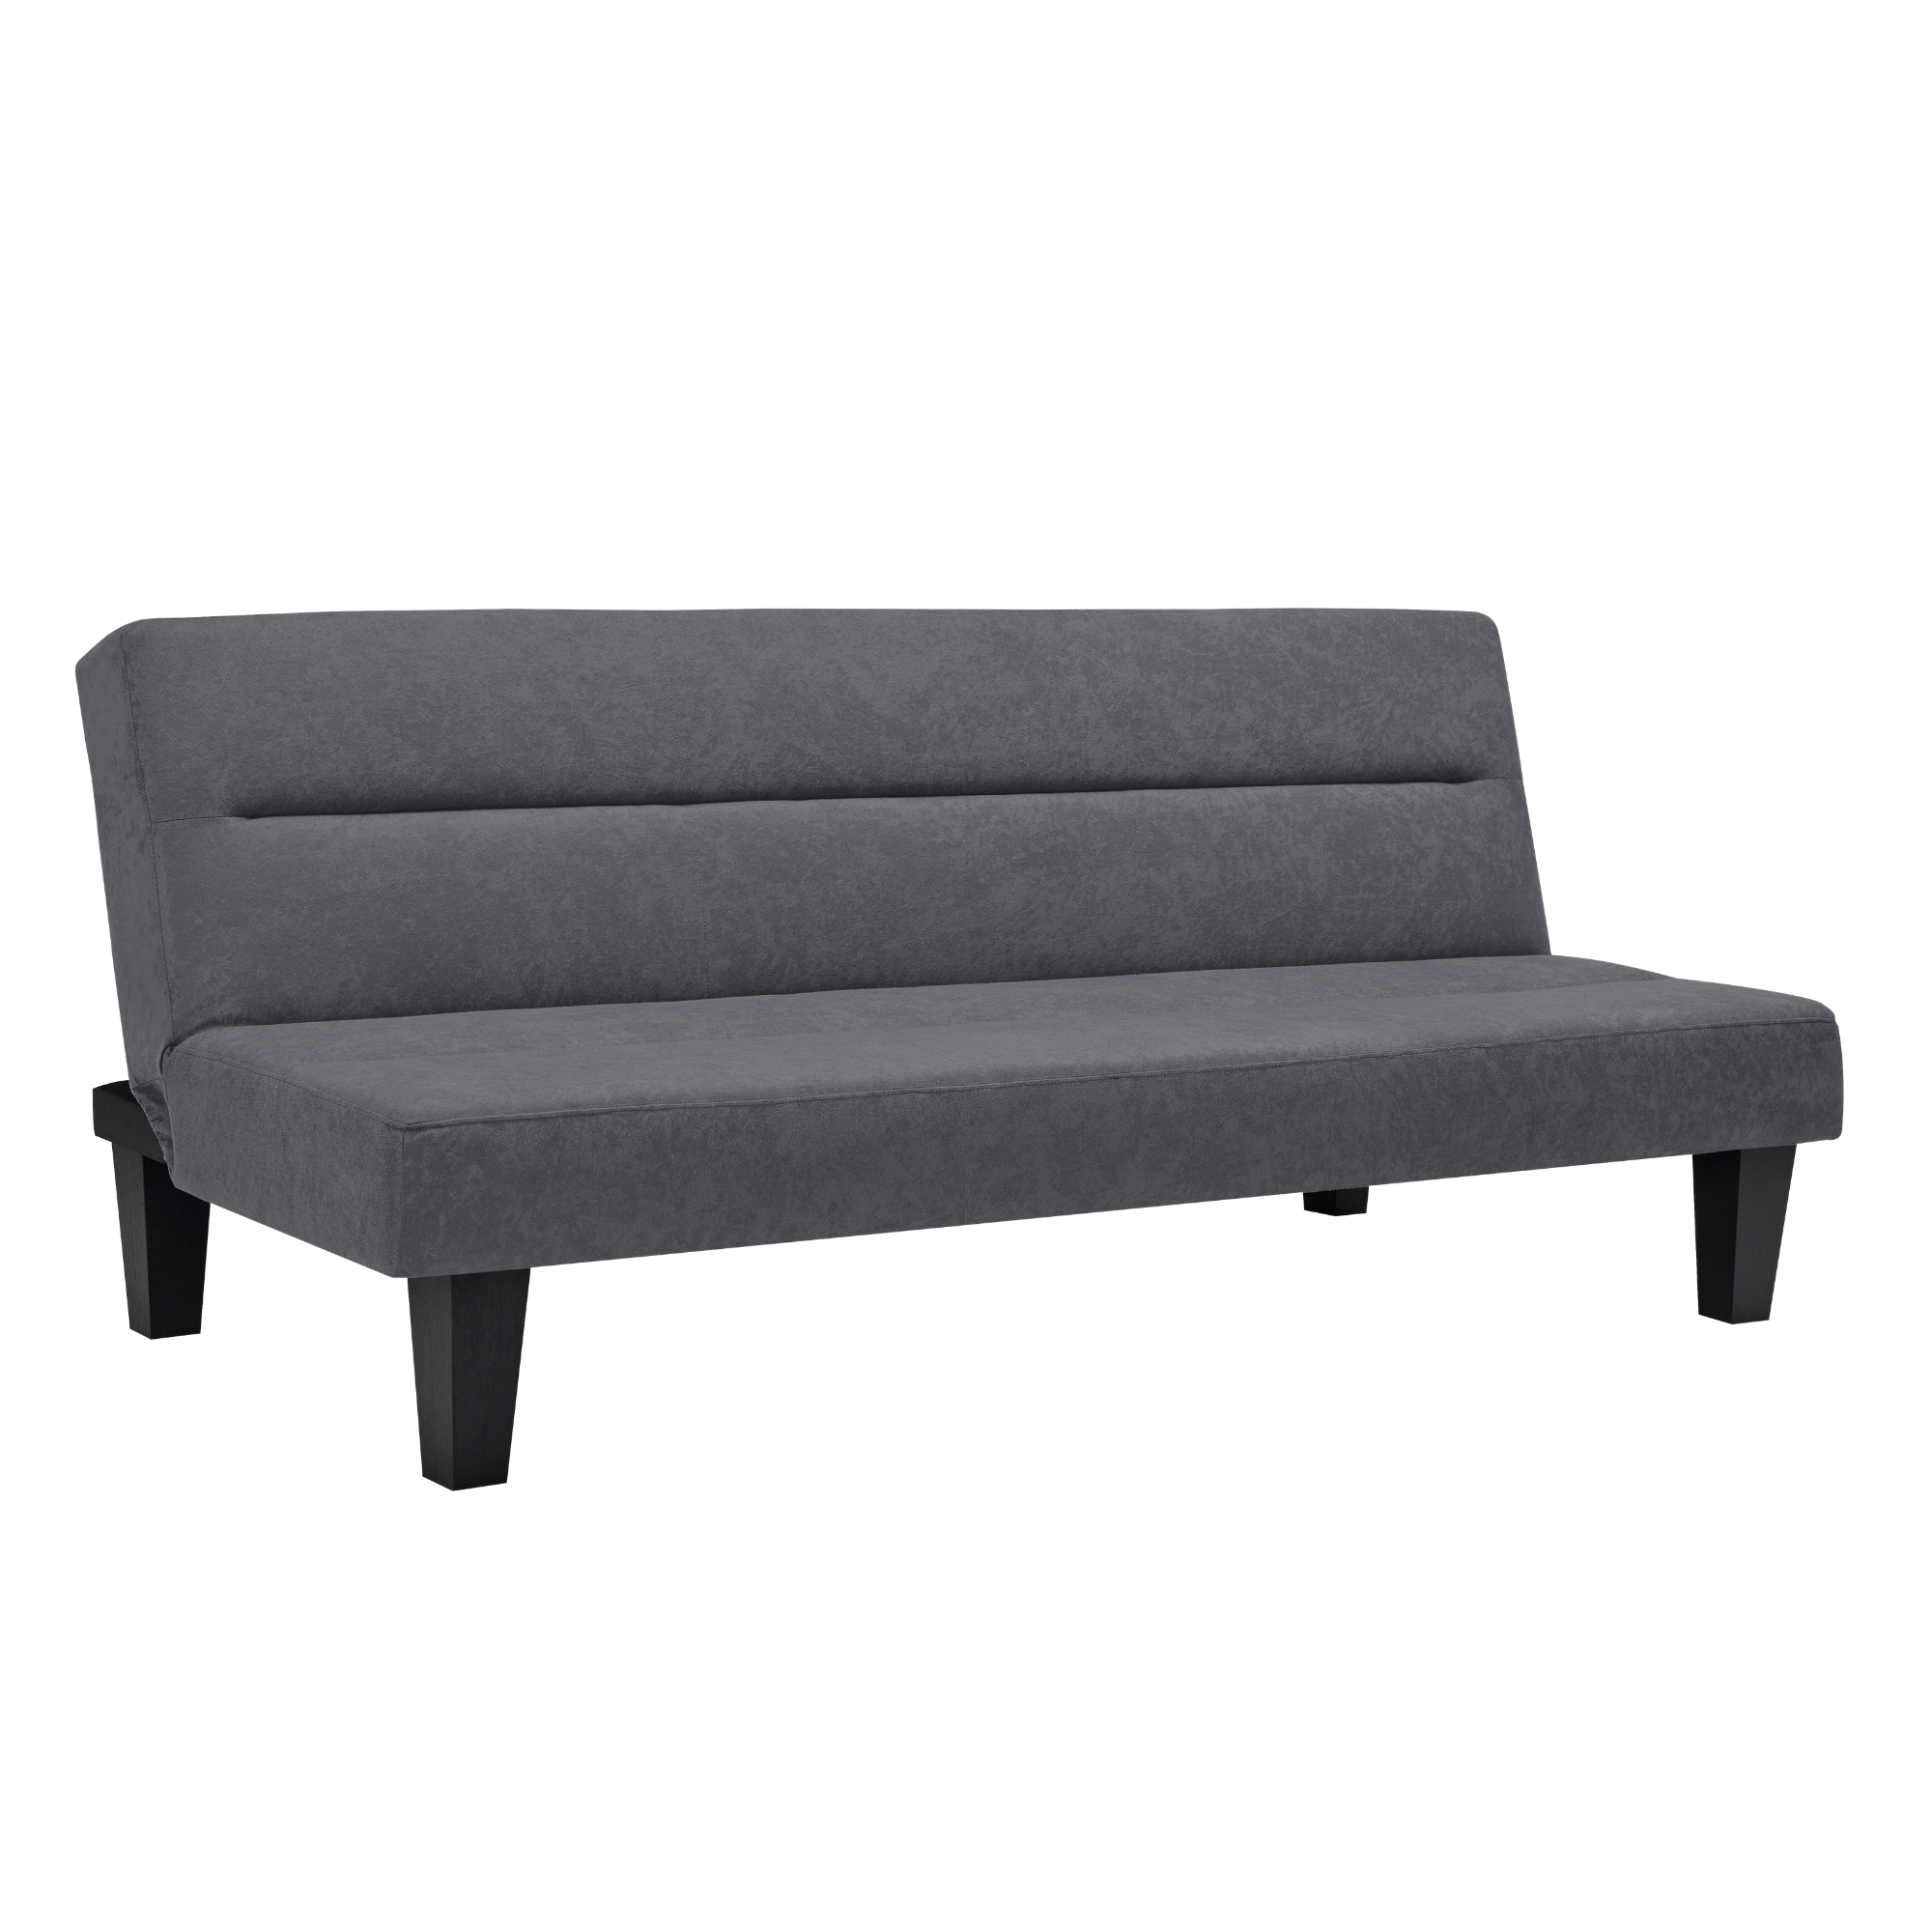 DHP Kebo Futon with Microfiber Cover, Gray Microfiber - image 4 of 14